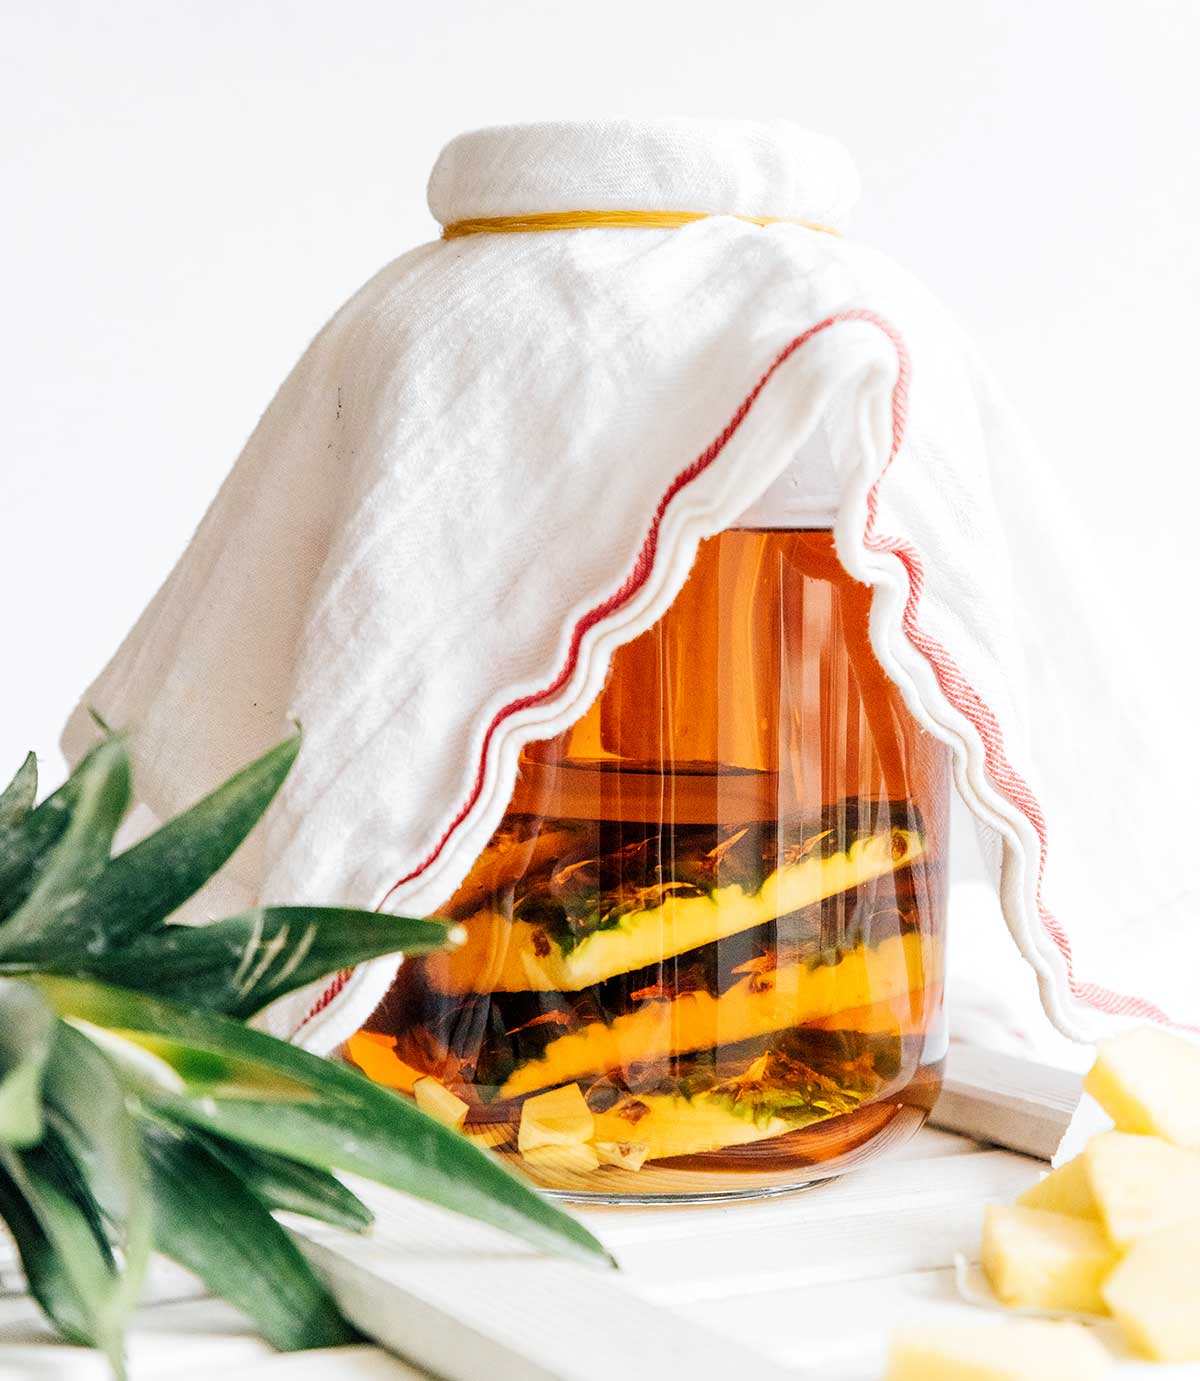 Making tepache in a glass jug on a white background